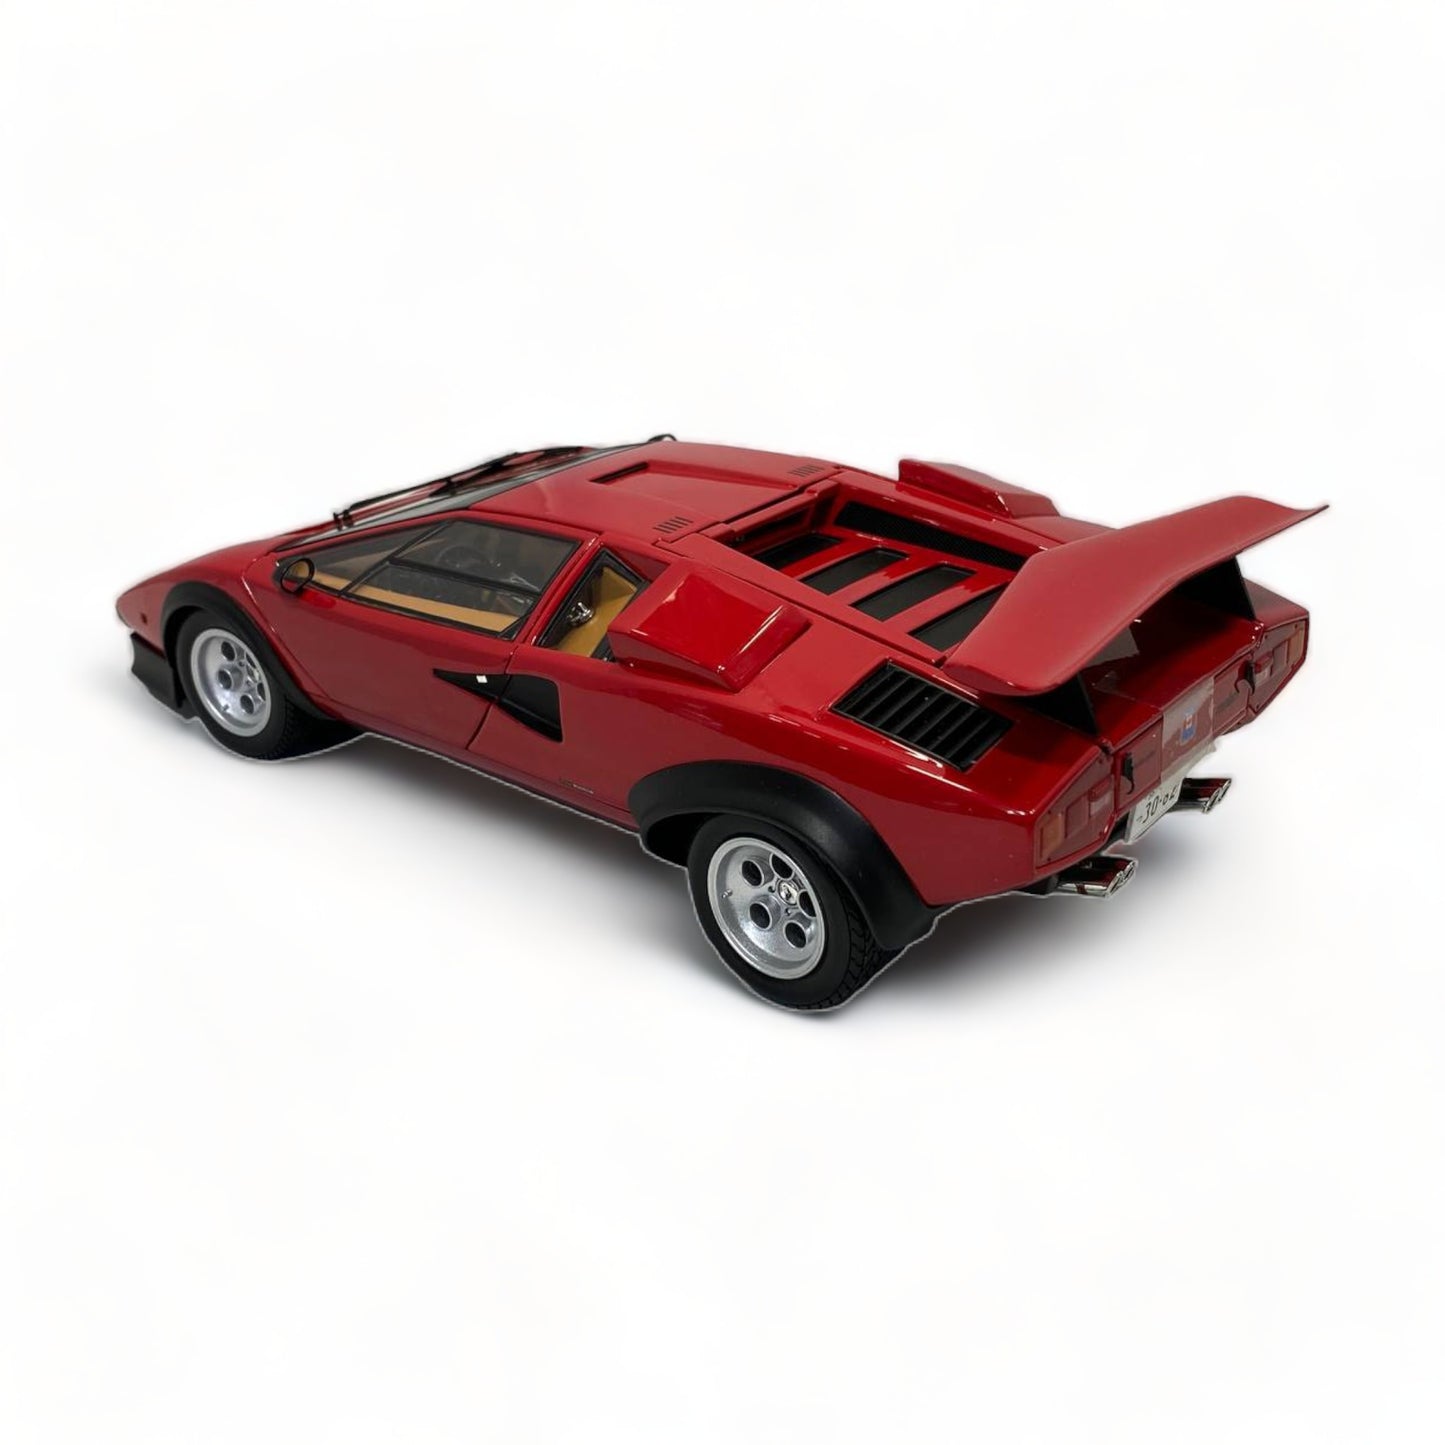 1/18 Diecast Kyosho Lamborghini Countach Walter Wolf Red Scale Model Car